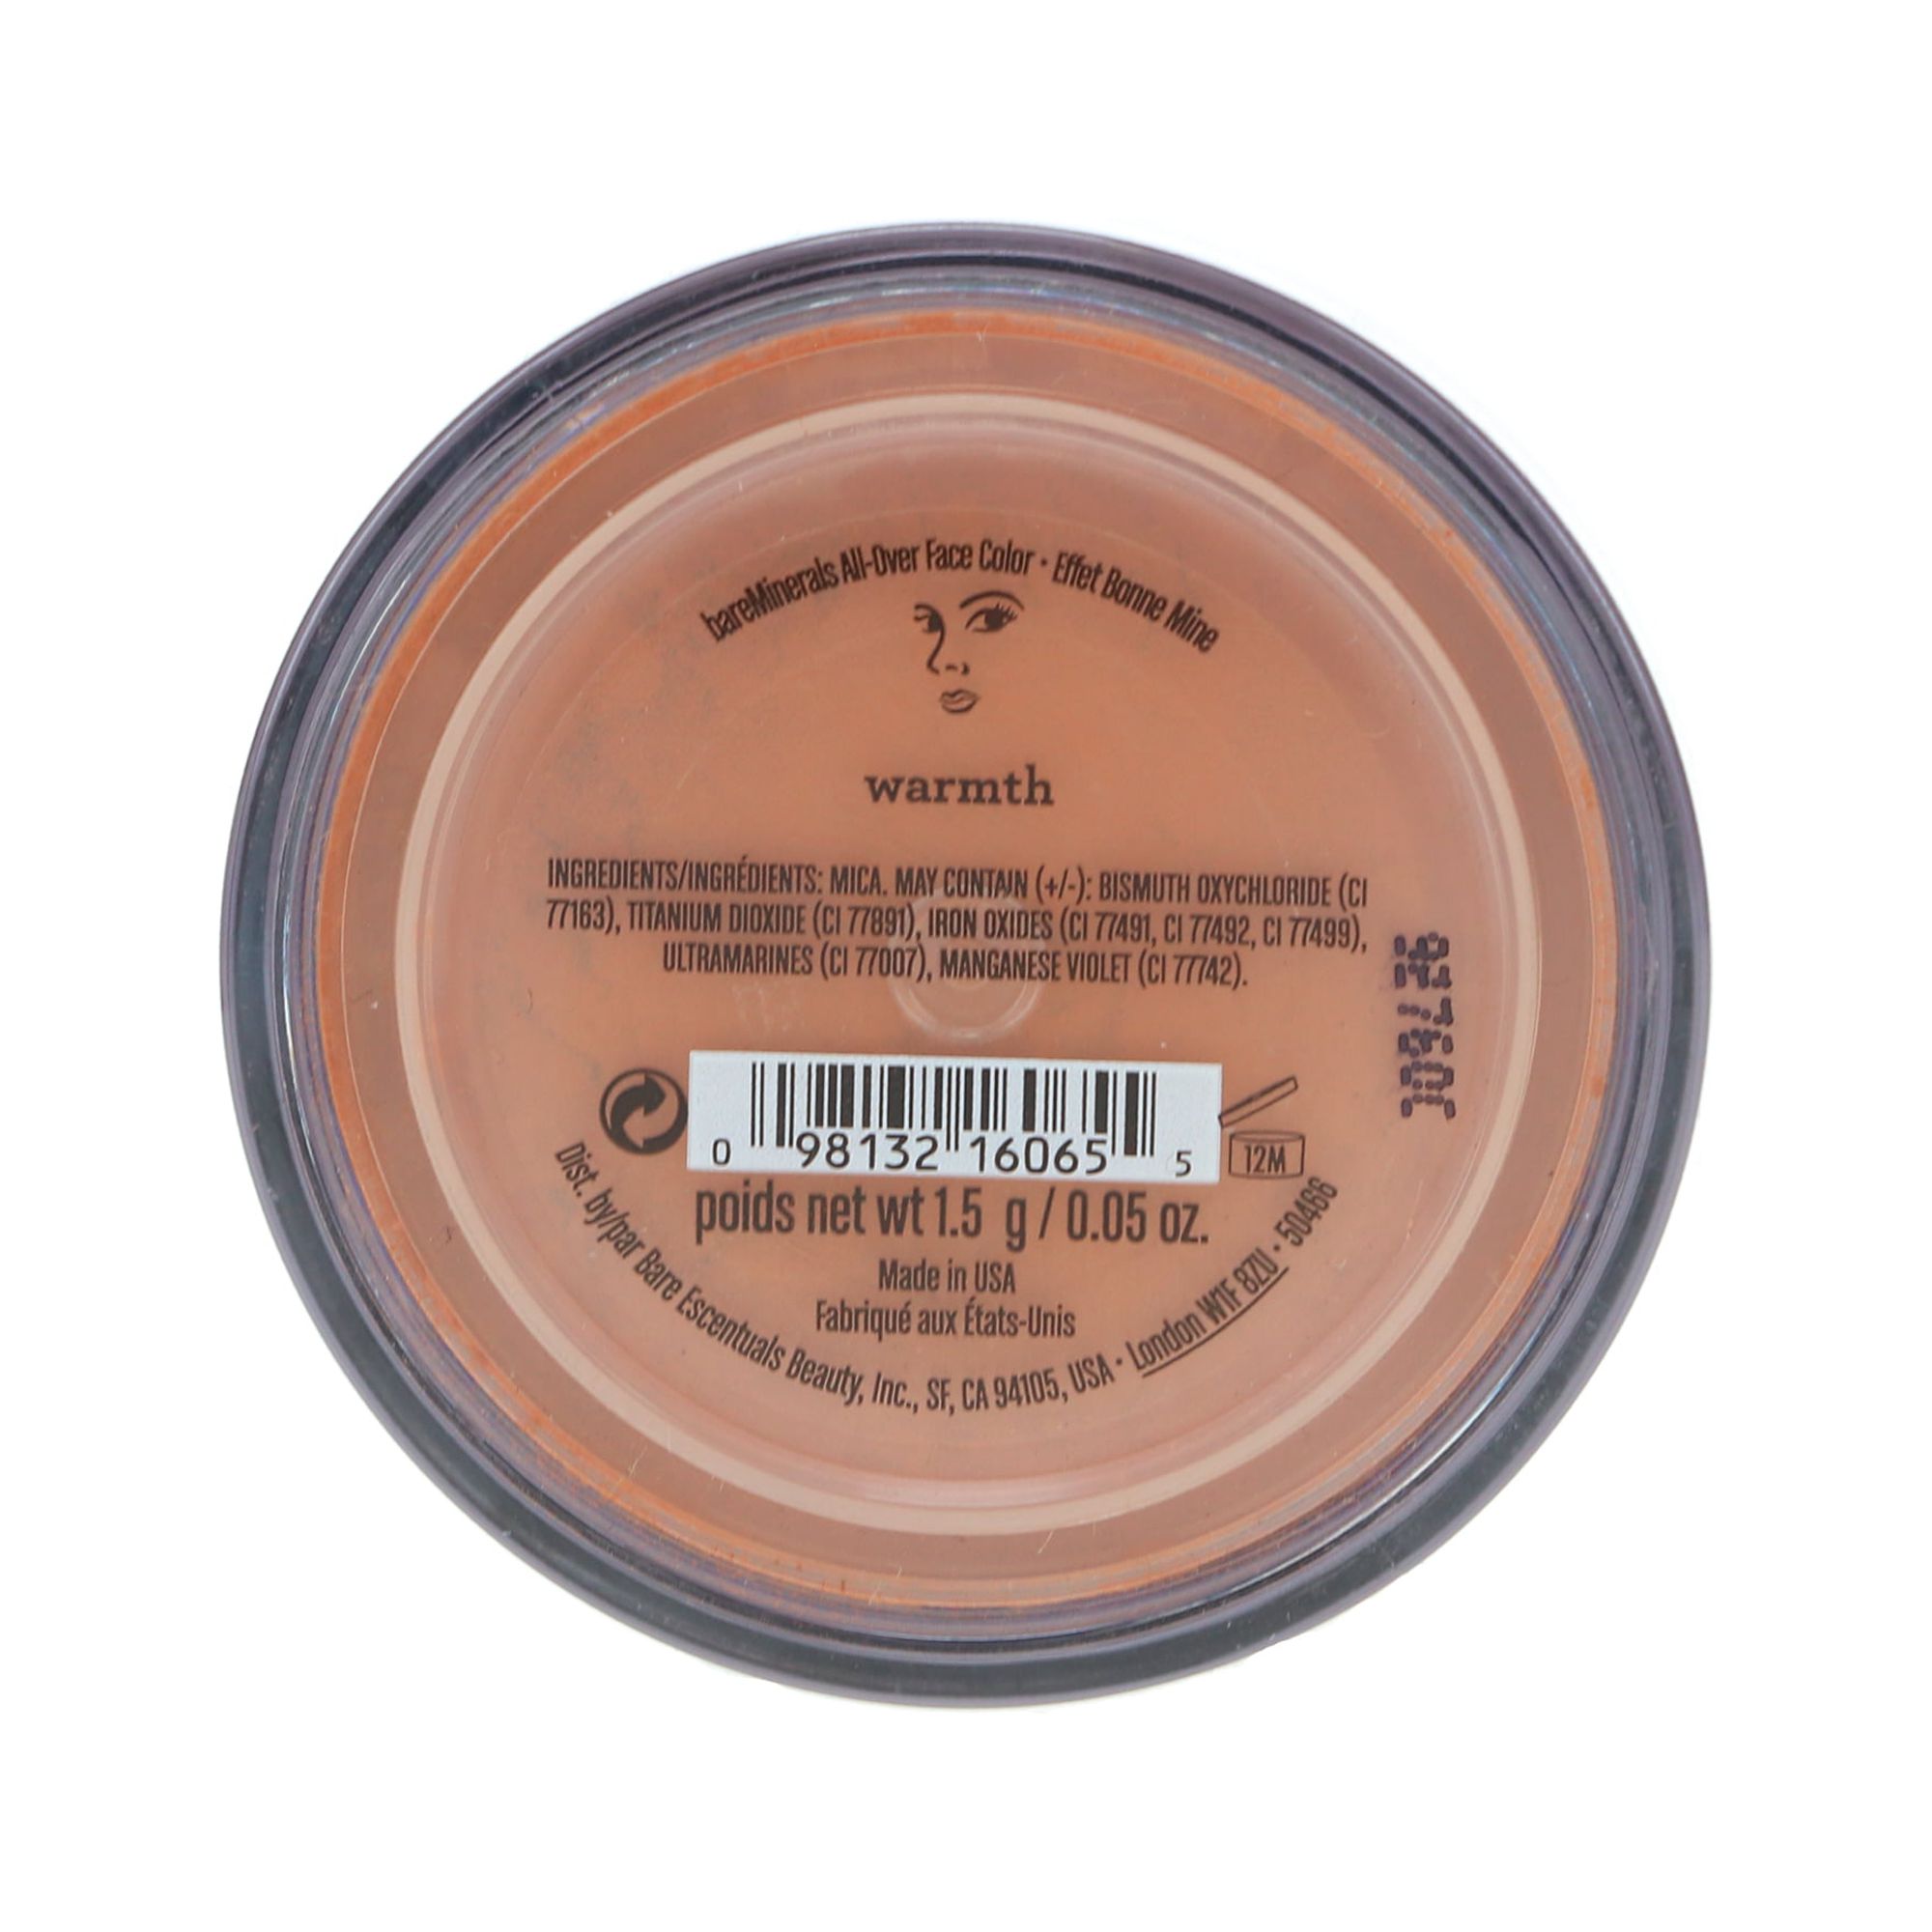 All-Over Face Color - Warmth by bareMinerals for Women - 0.05 oz Powder - image 5 of 8